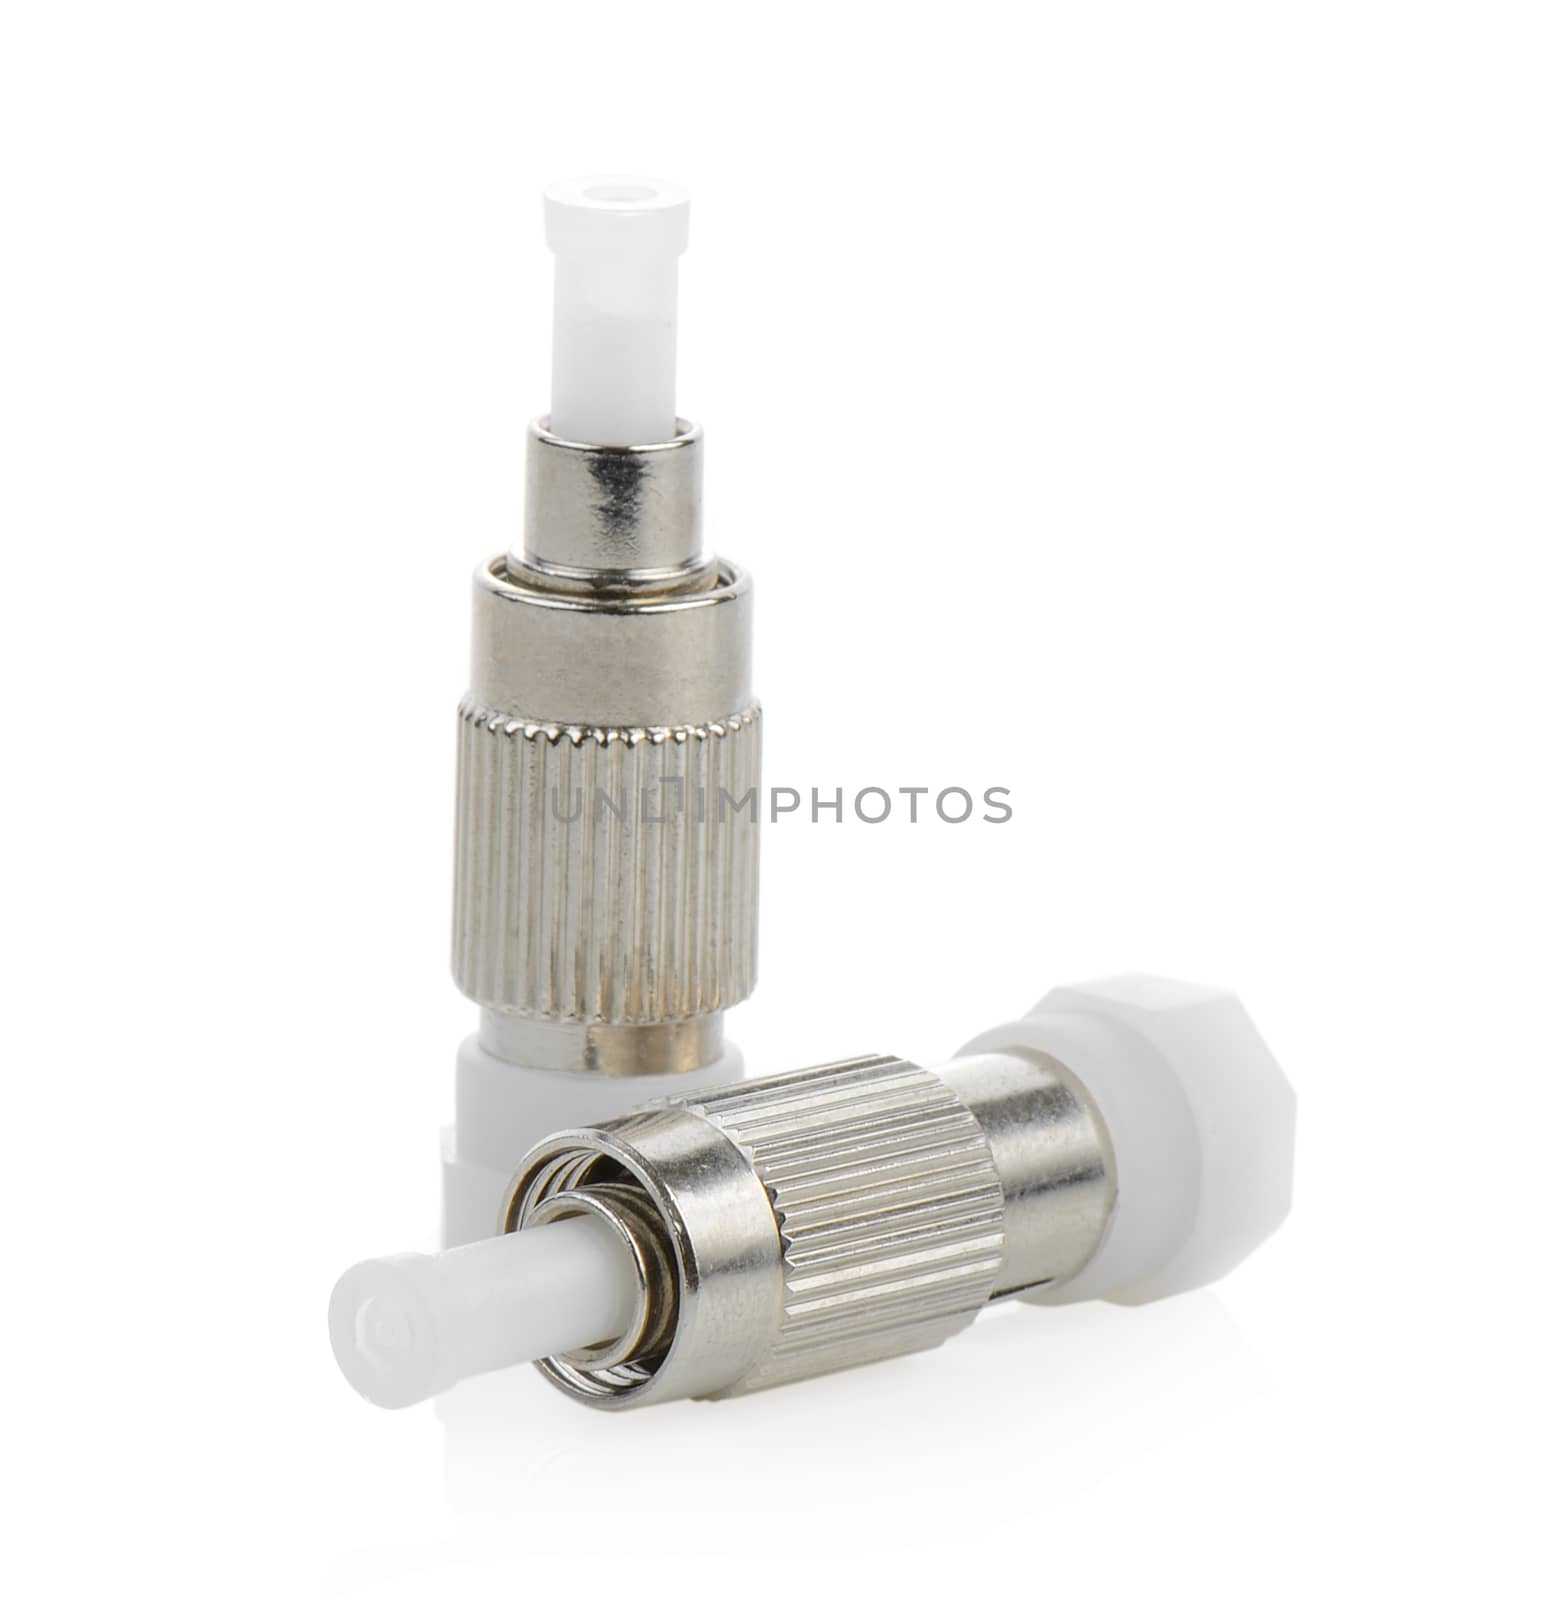 fiber optic connectors, ST, SC and FC isolated on white background